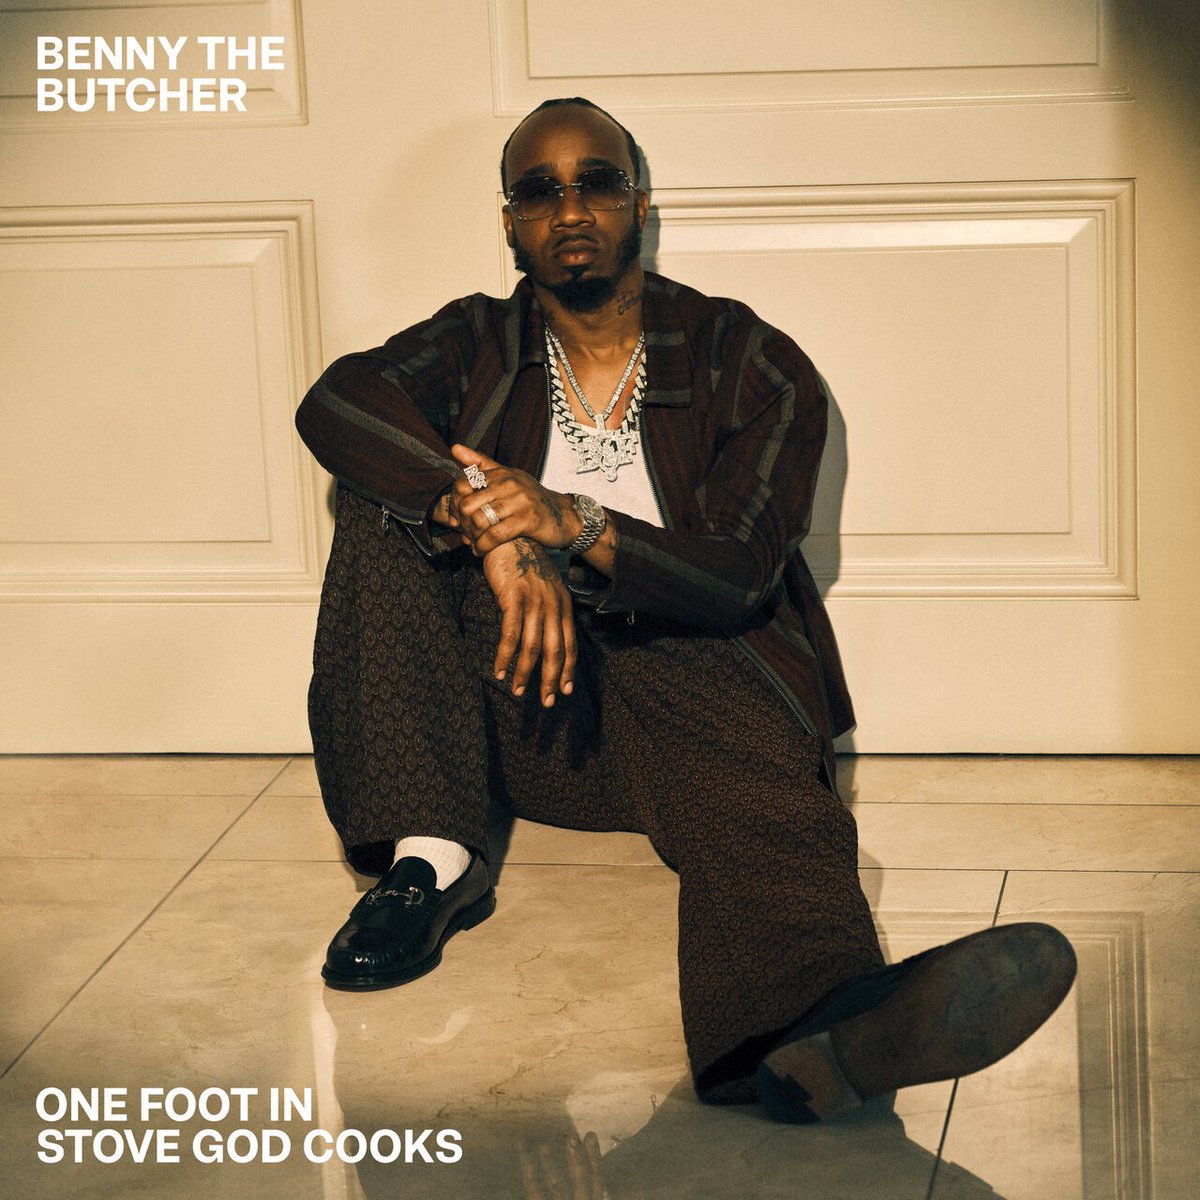 Please let this be a single off a forthcomin album! I need it! #NowPlaying 'One Foot In' by @BennyBsf, @Stovegodcooks on @TIDAL tidal.com/track/332268549